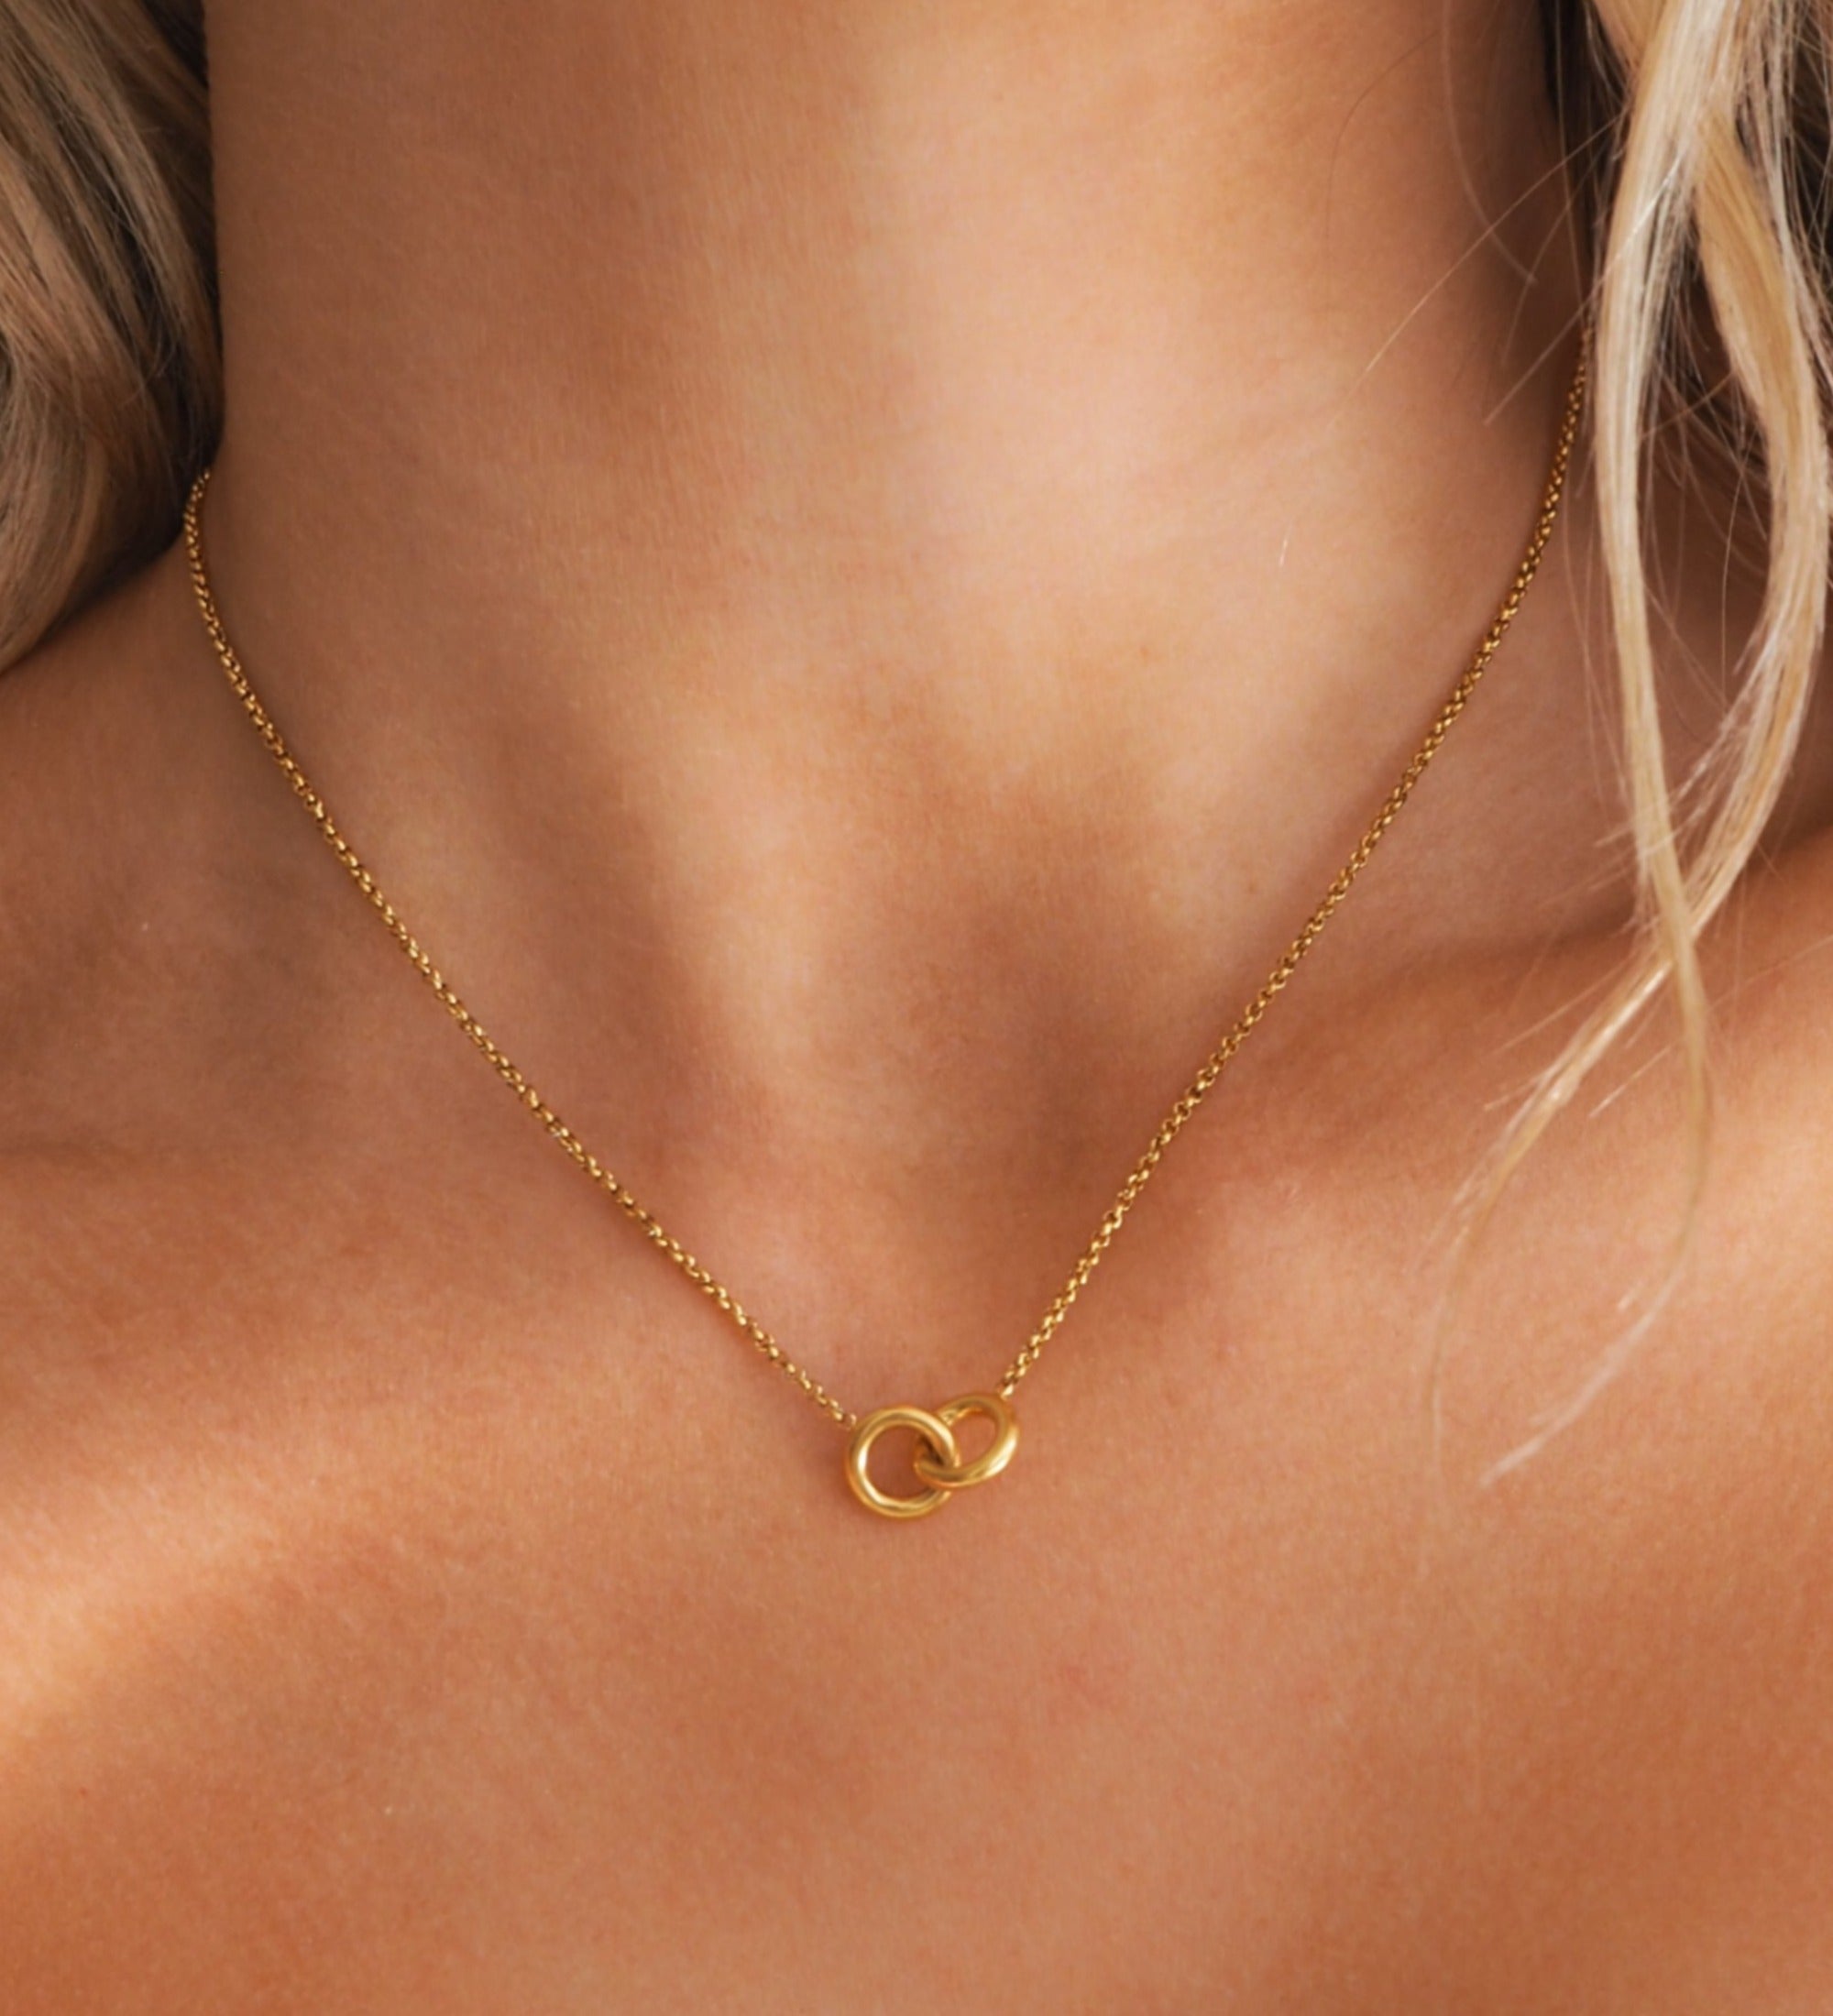 9ct Gold Love Knot Necklace By Hurleyburley | notonthehighstreet.com